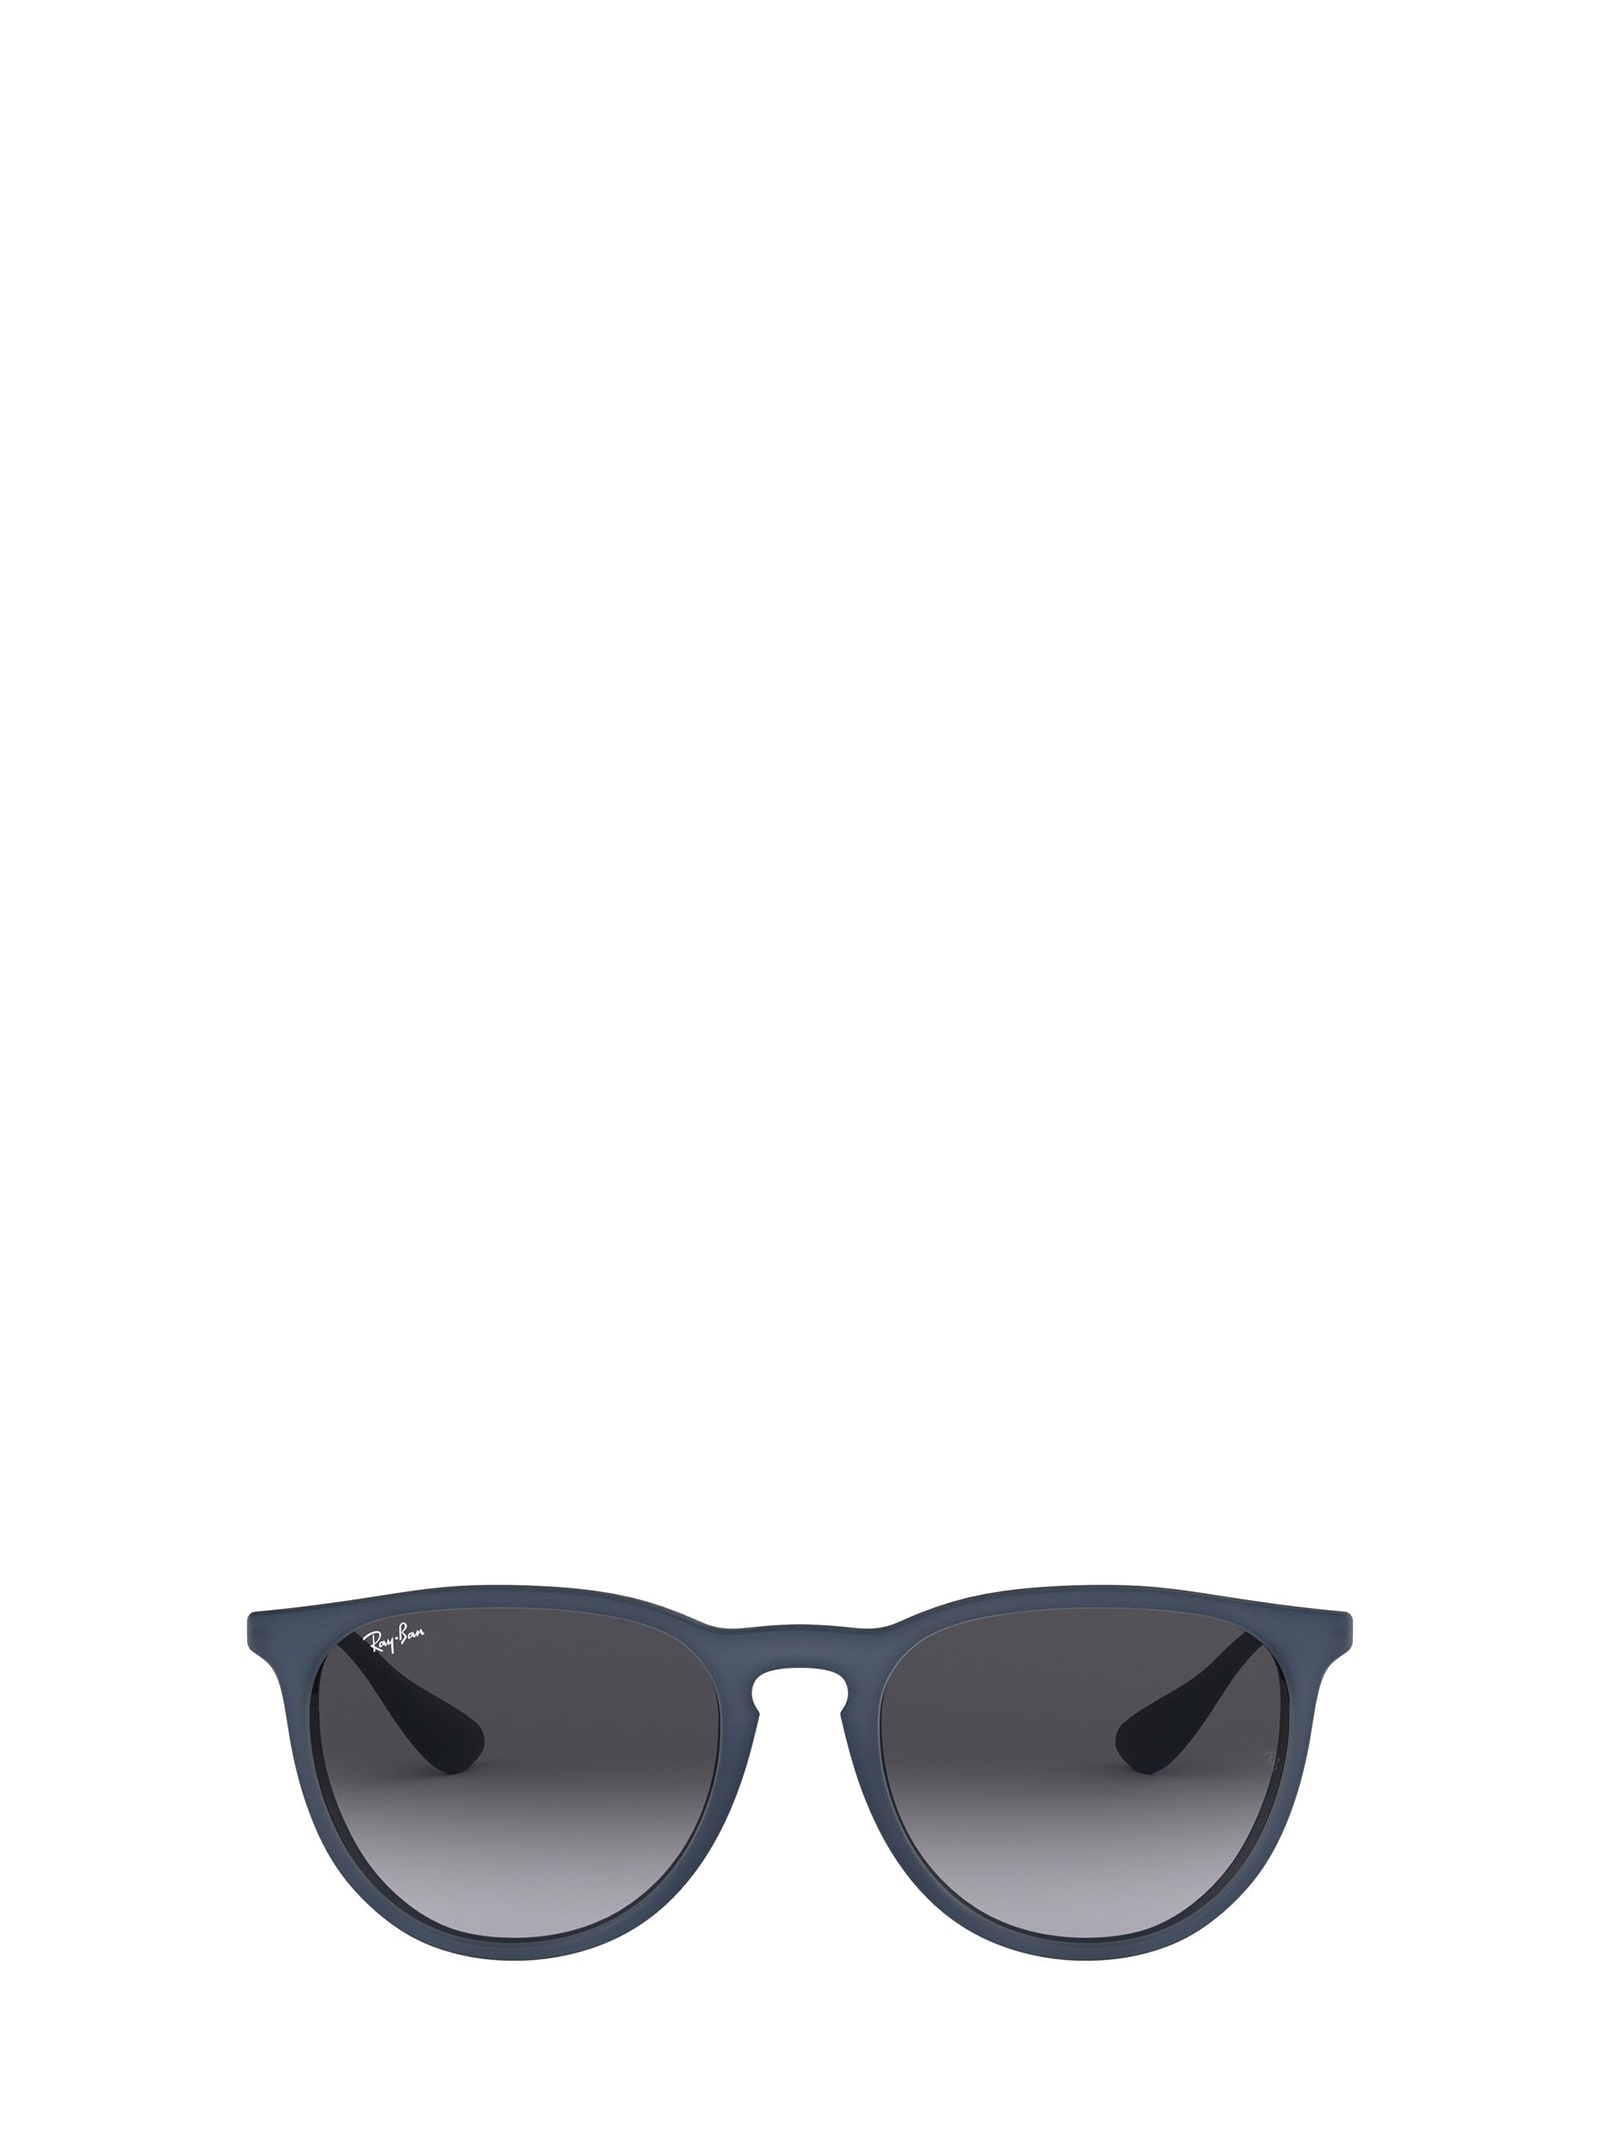 Ray-Ban Ray-ban Rb4171 Rubber Blue Sunglasses